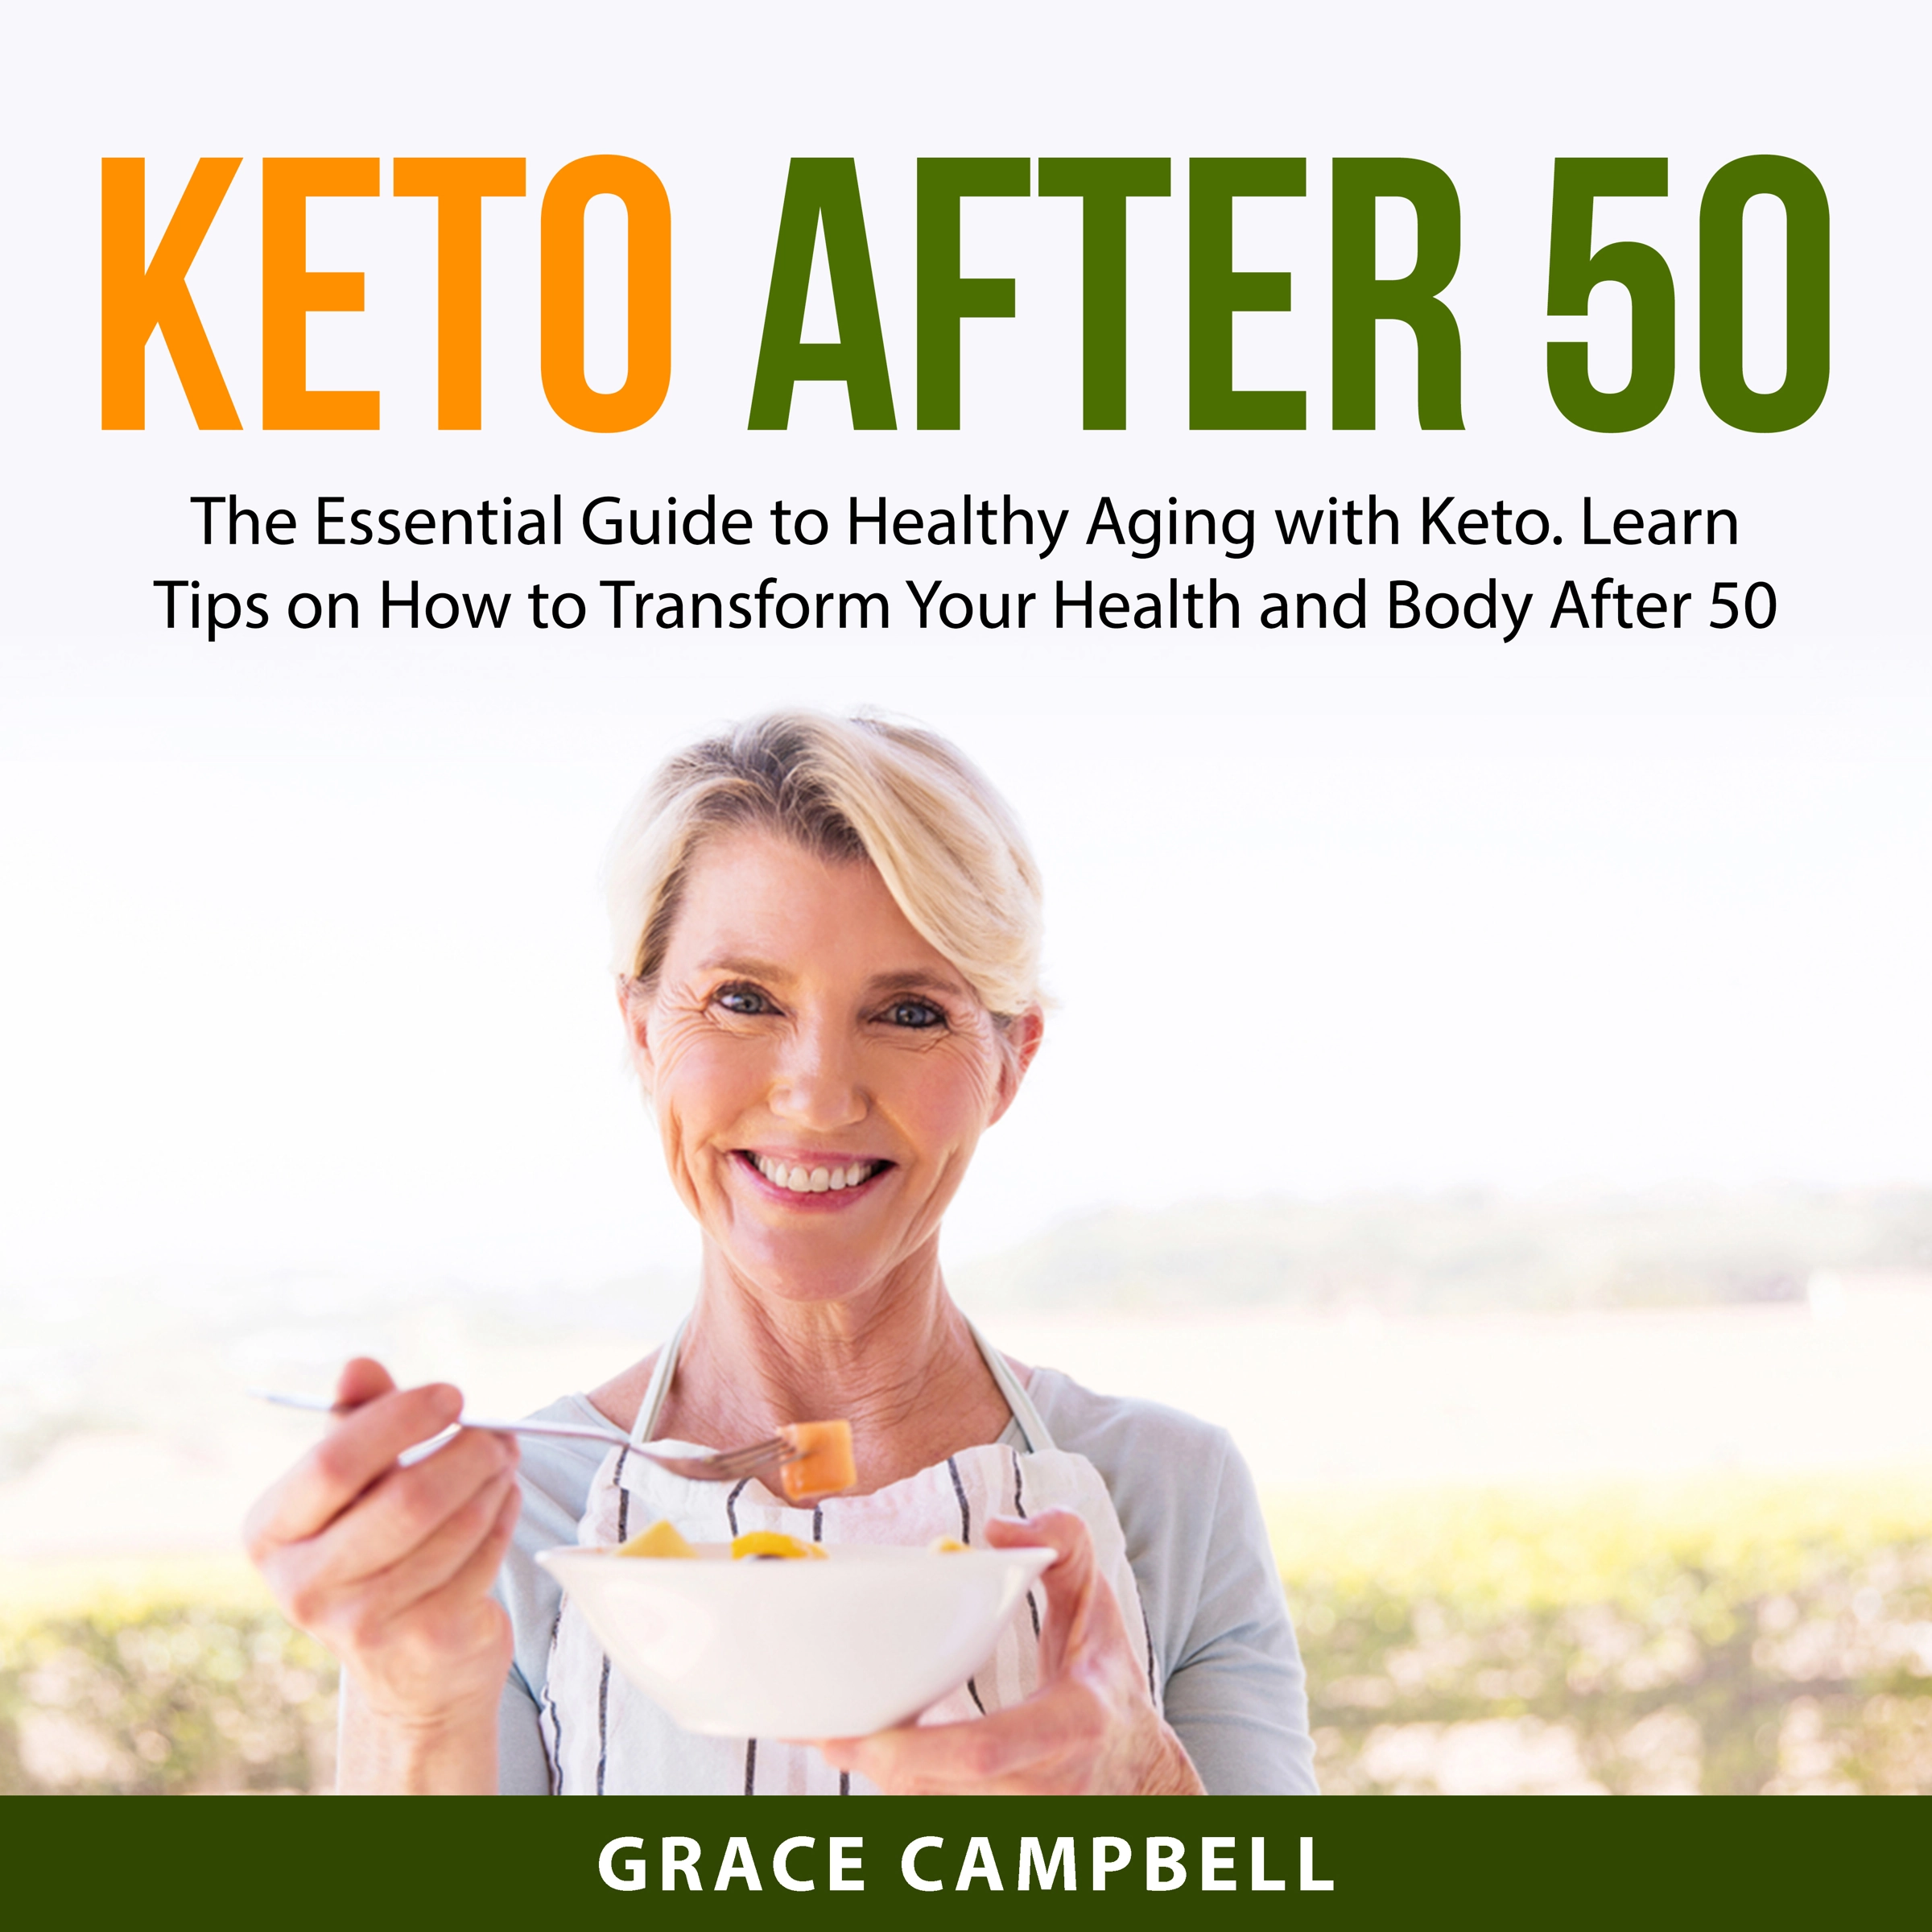 Keto After 50 Audiobook by Grace Campbell